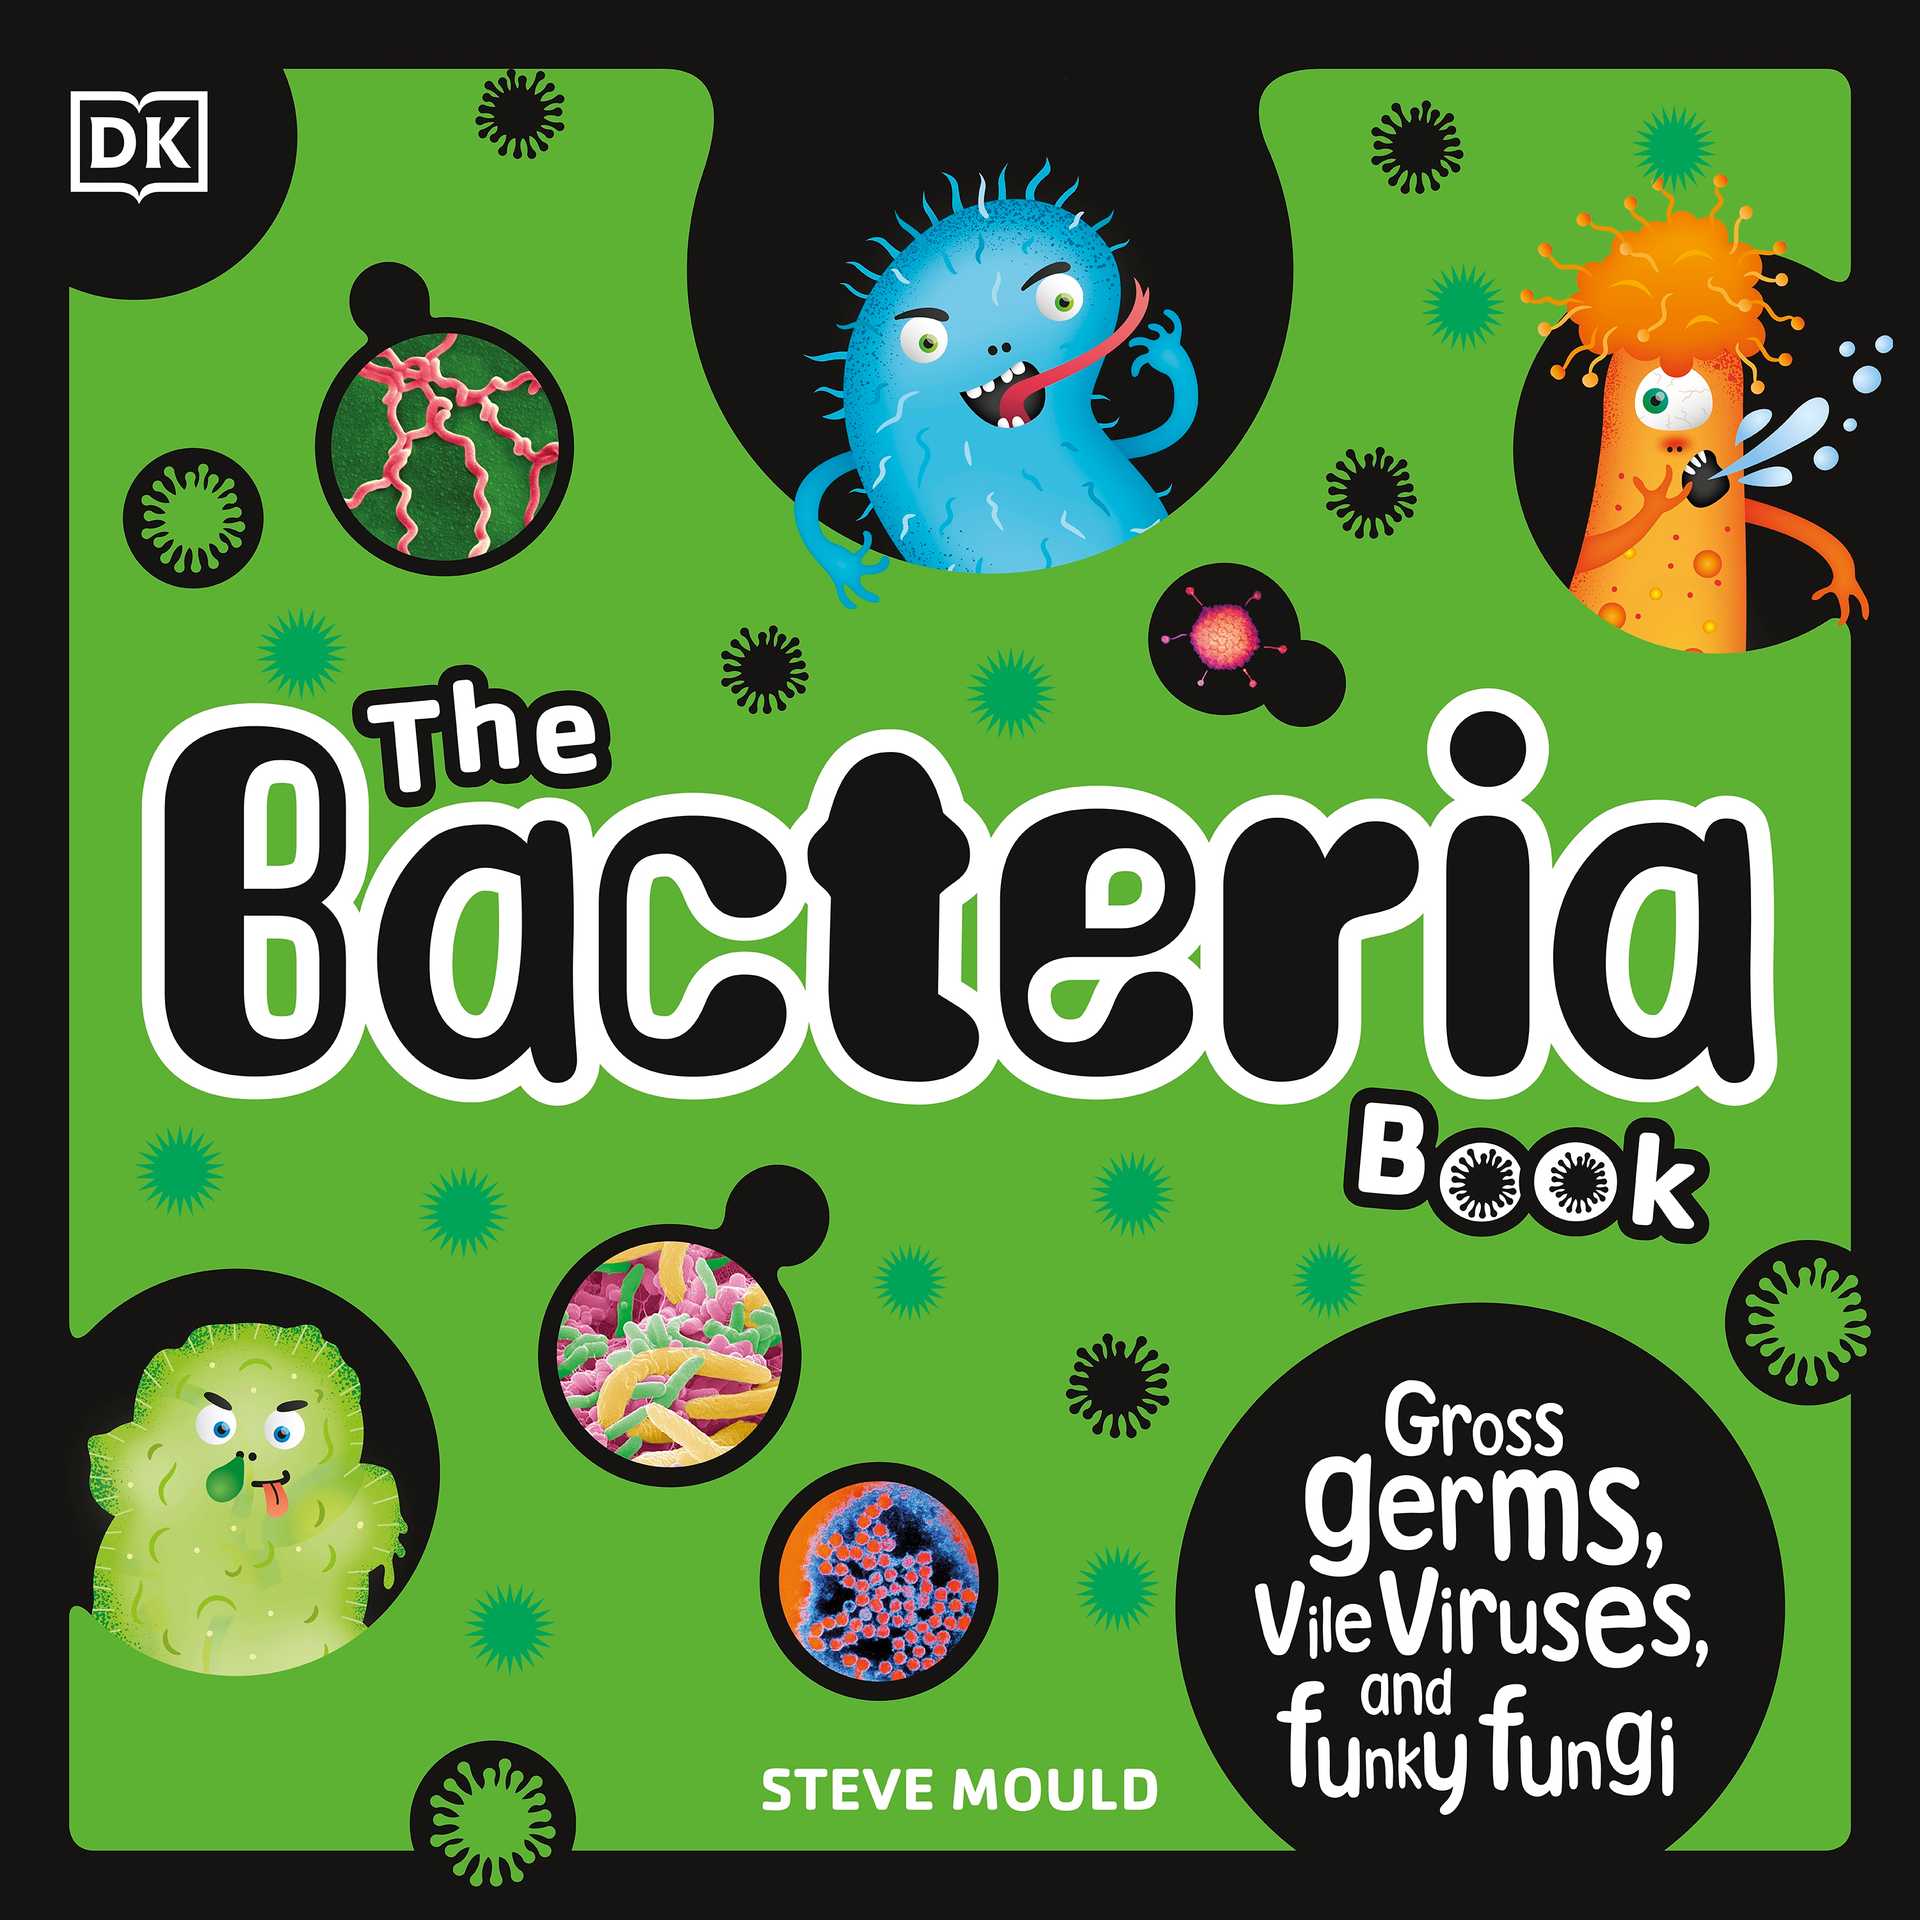 The Bacteria Book, by Steve Mould